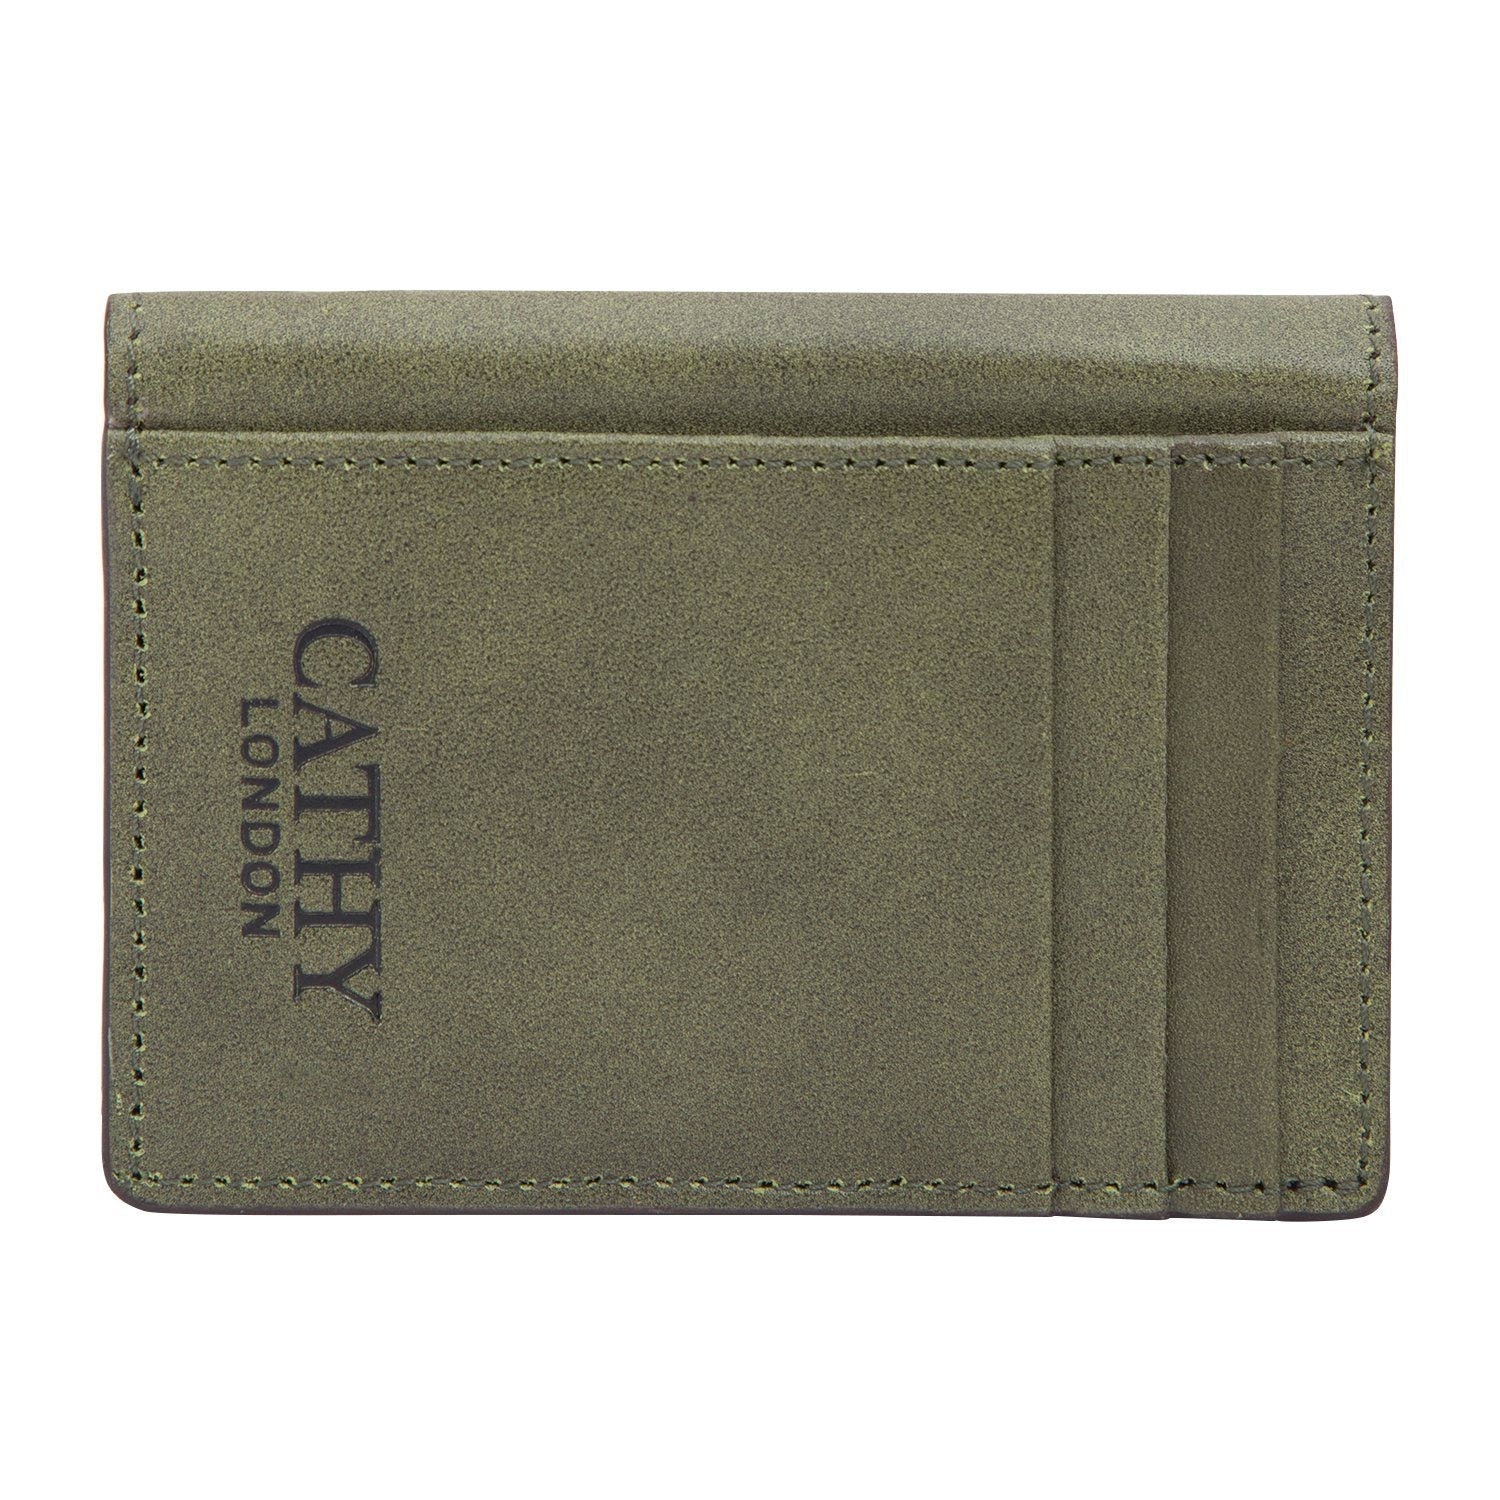 Olive Colour Bi-Fold Italian Leather Slim Wallet/Card Holder (9 Card Slot + 3 Hidden Compartment + 1 ID Slot + Cash Compartment) Cathy London 